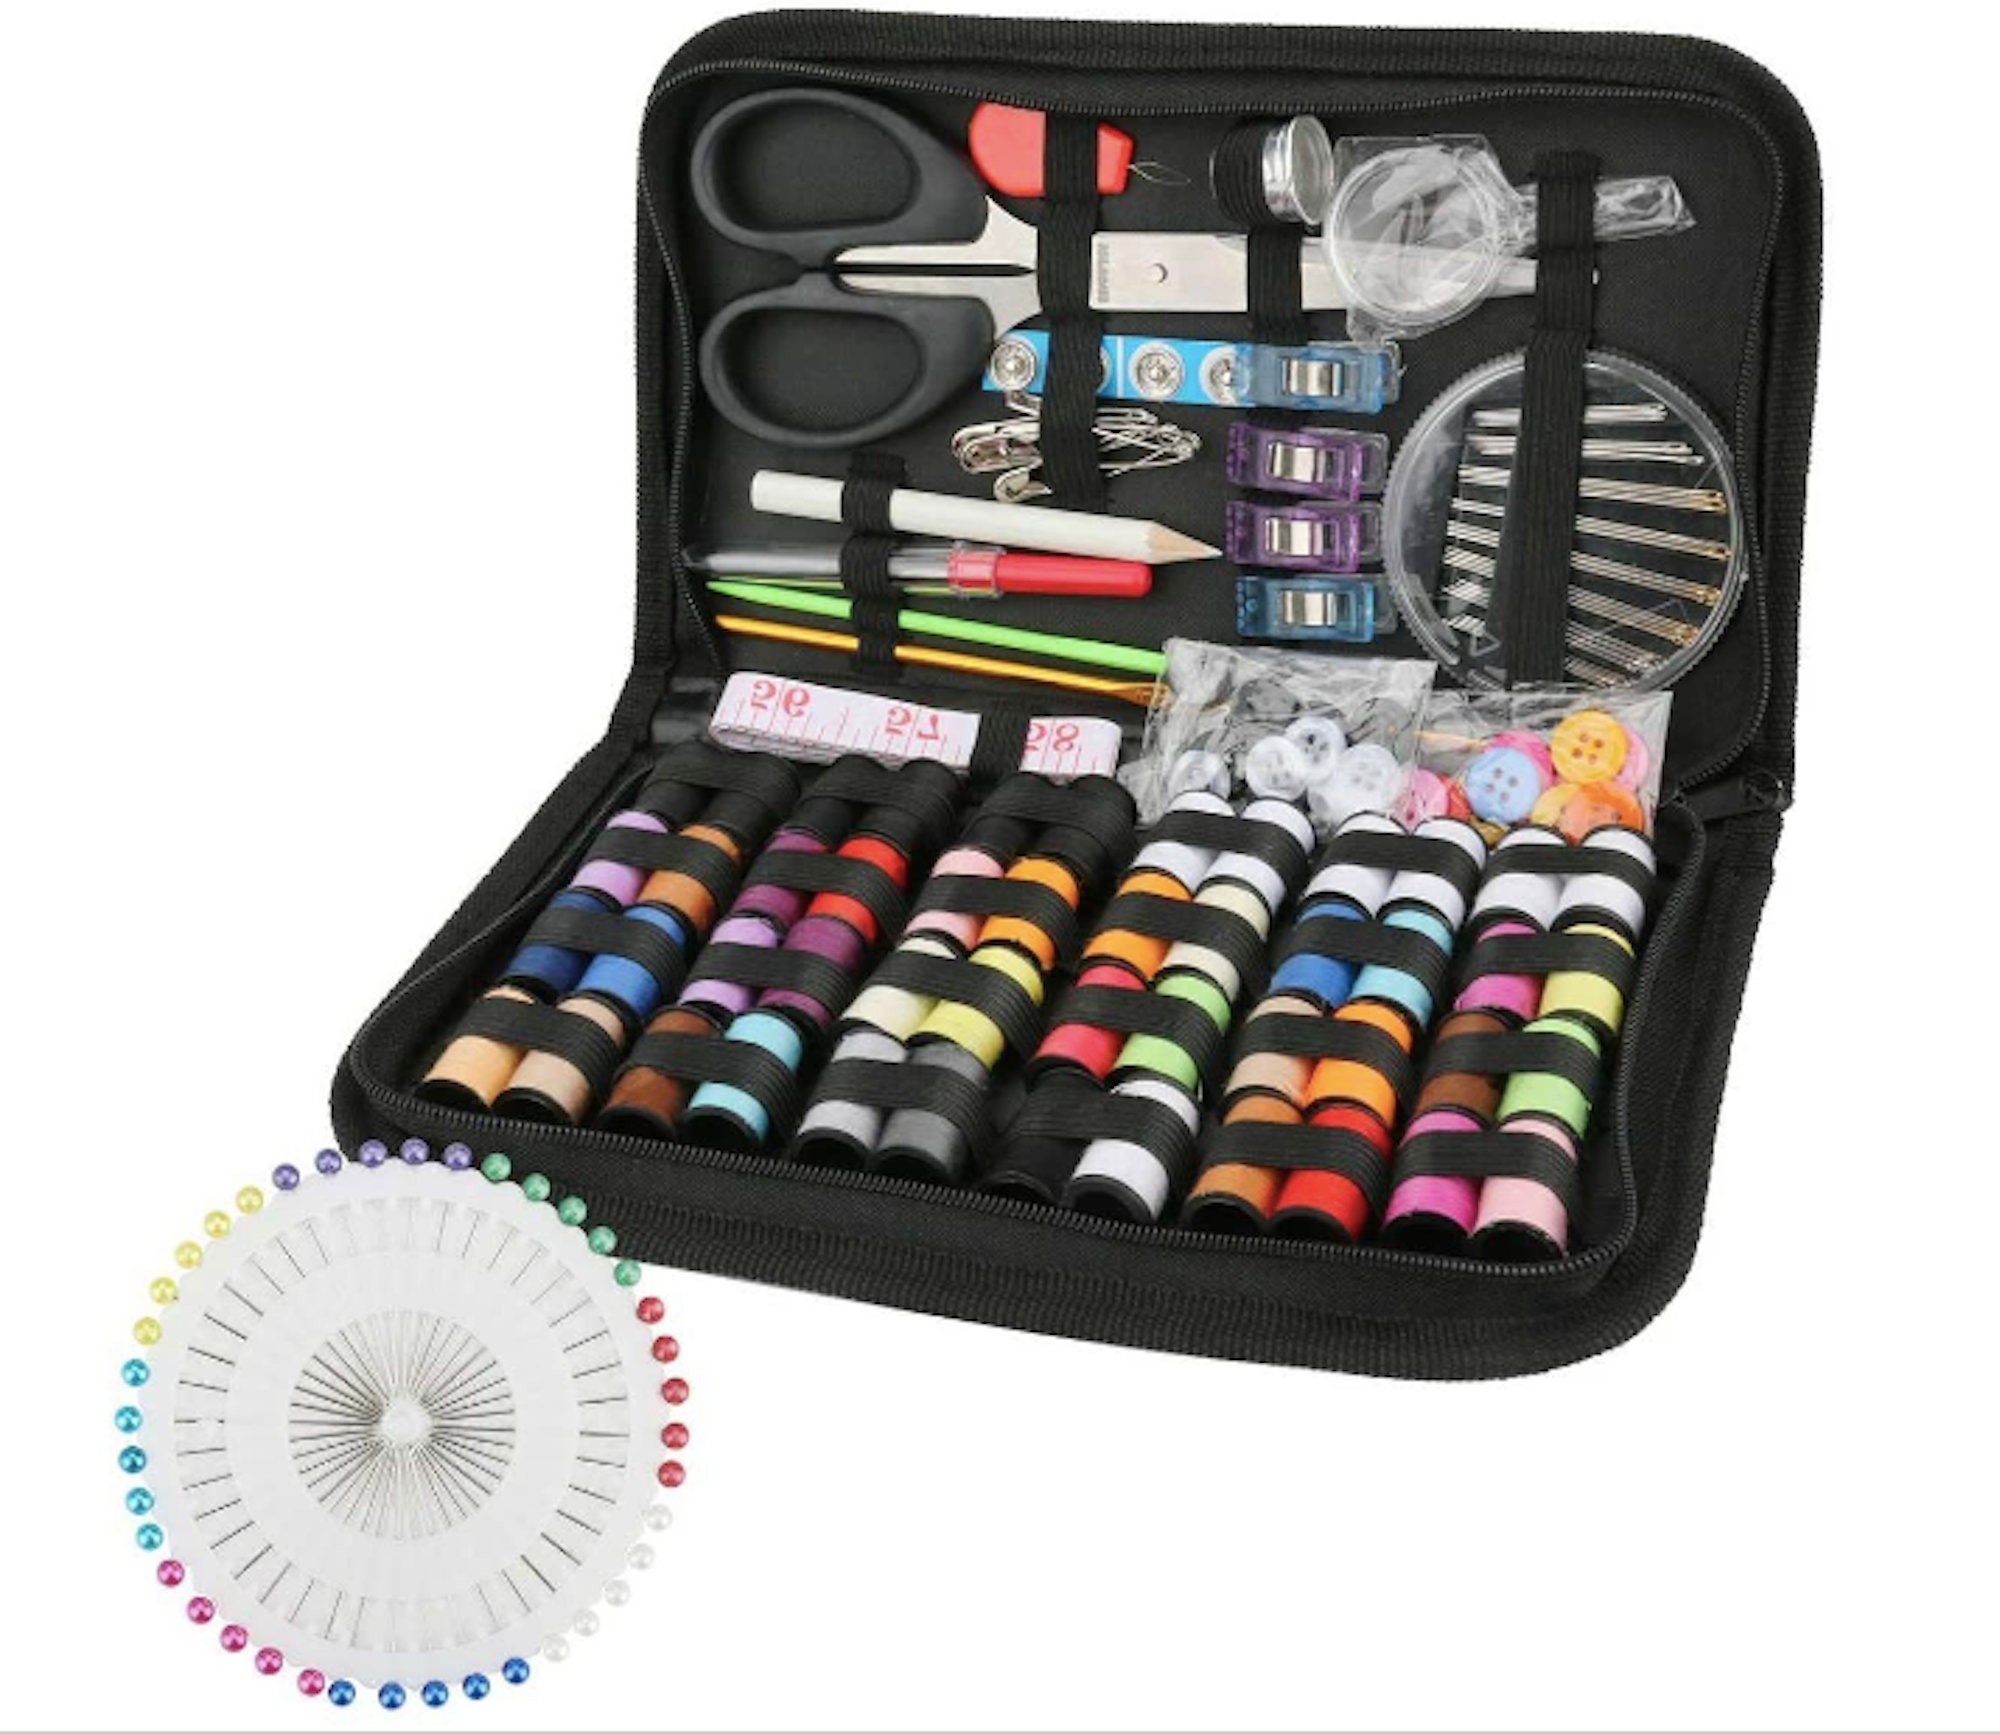 183pcs Premium Sewing Machine Kit For Adults, College Students